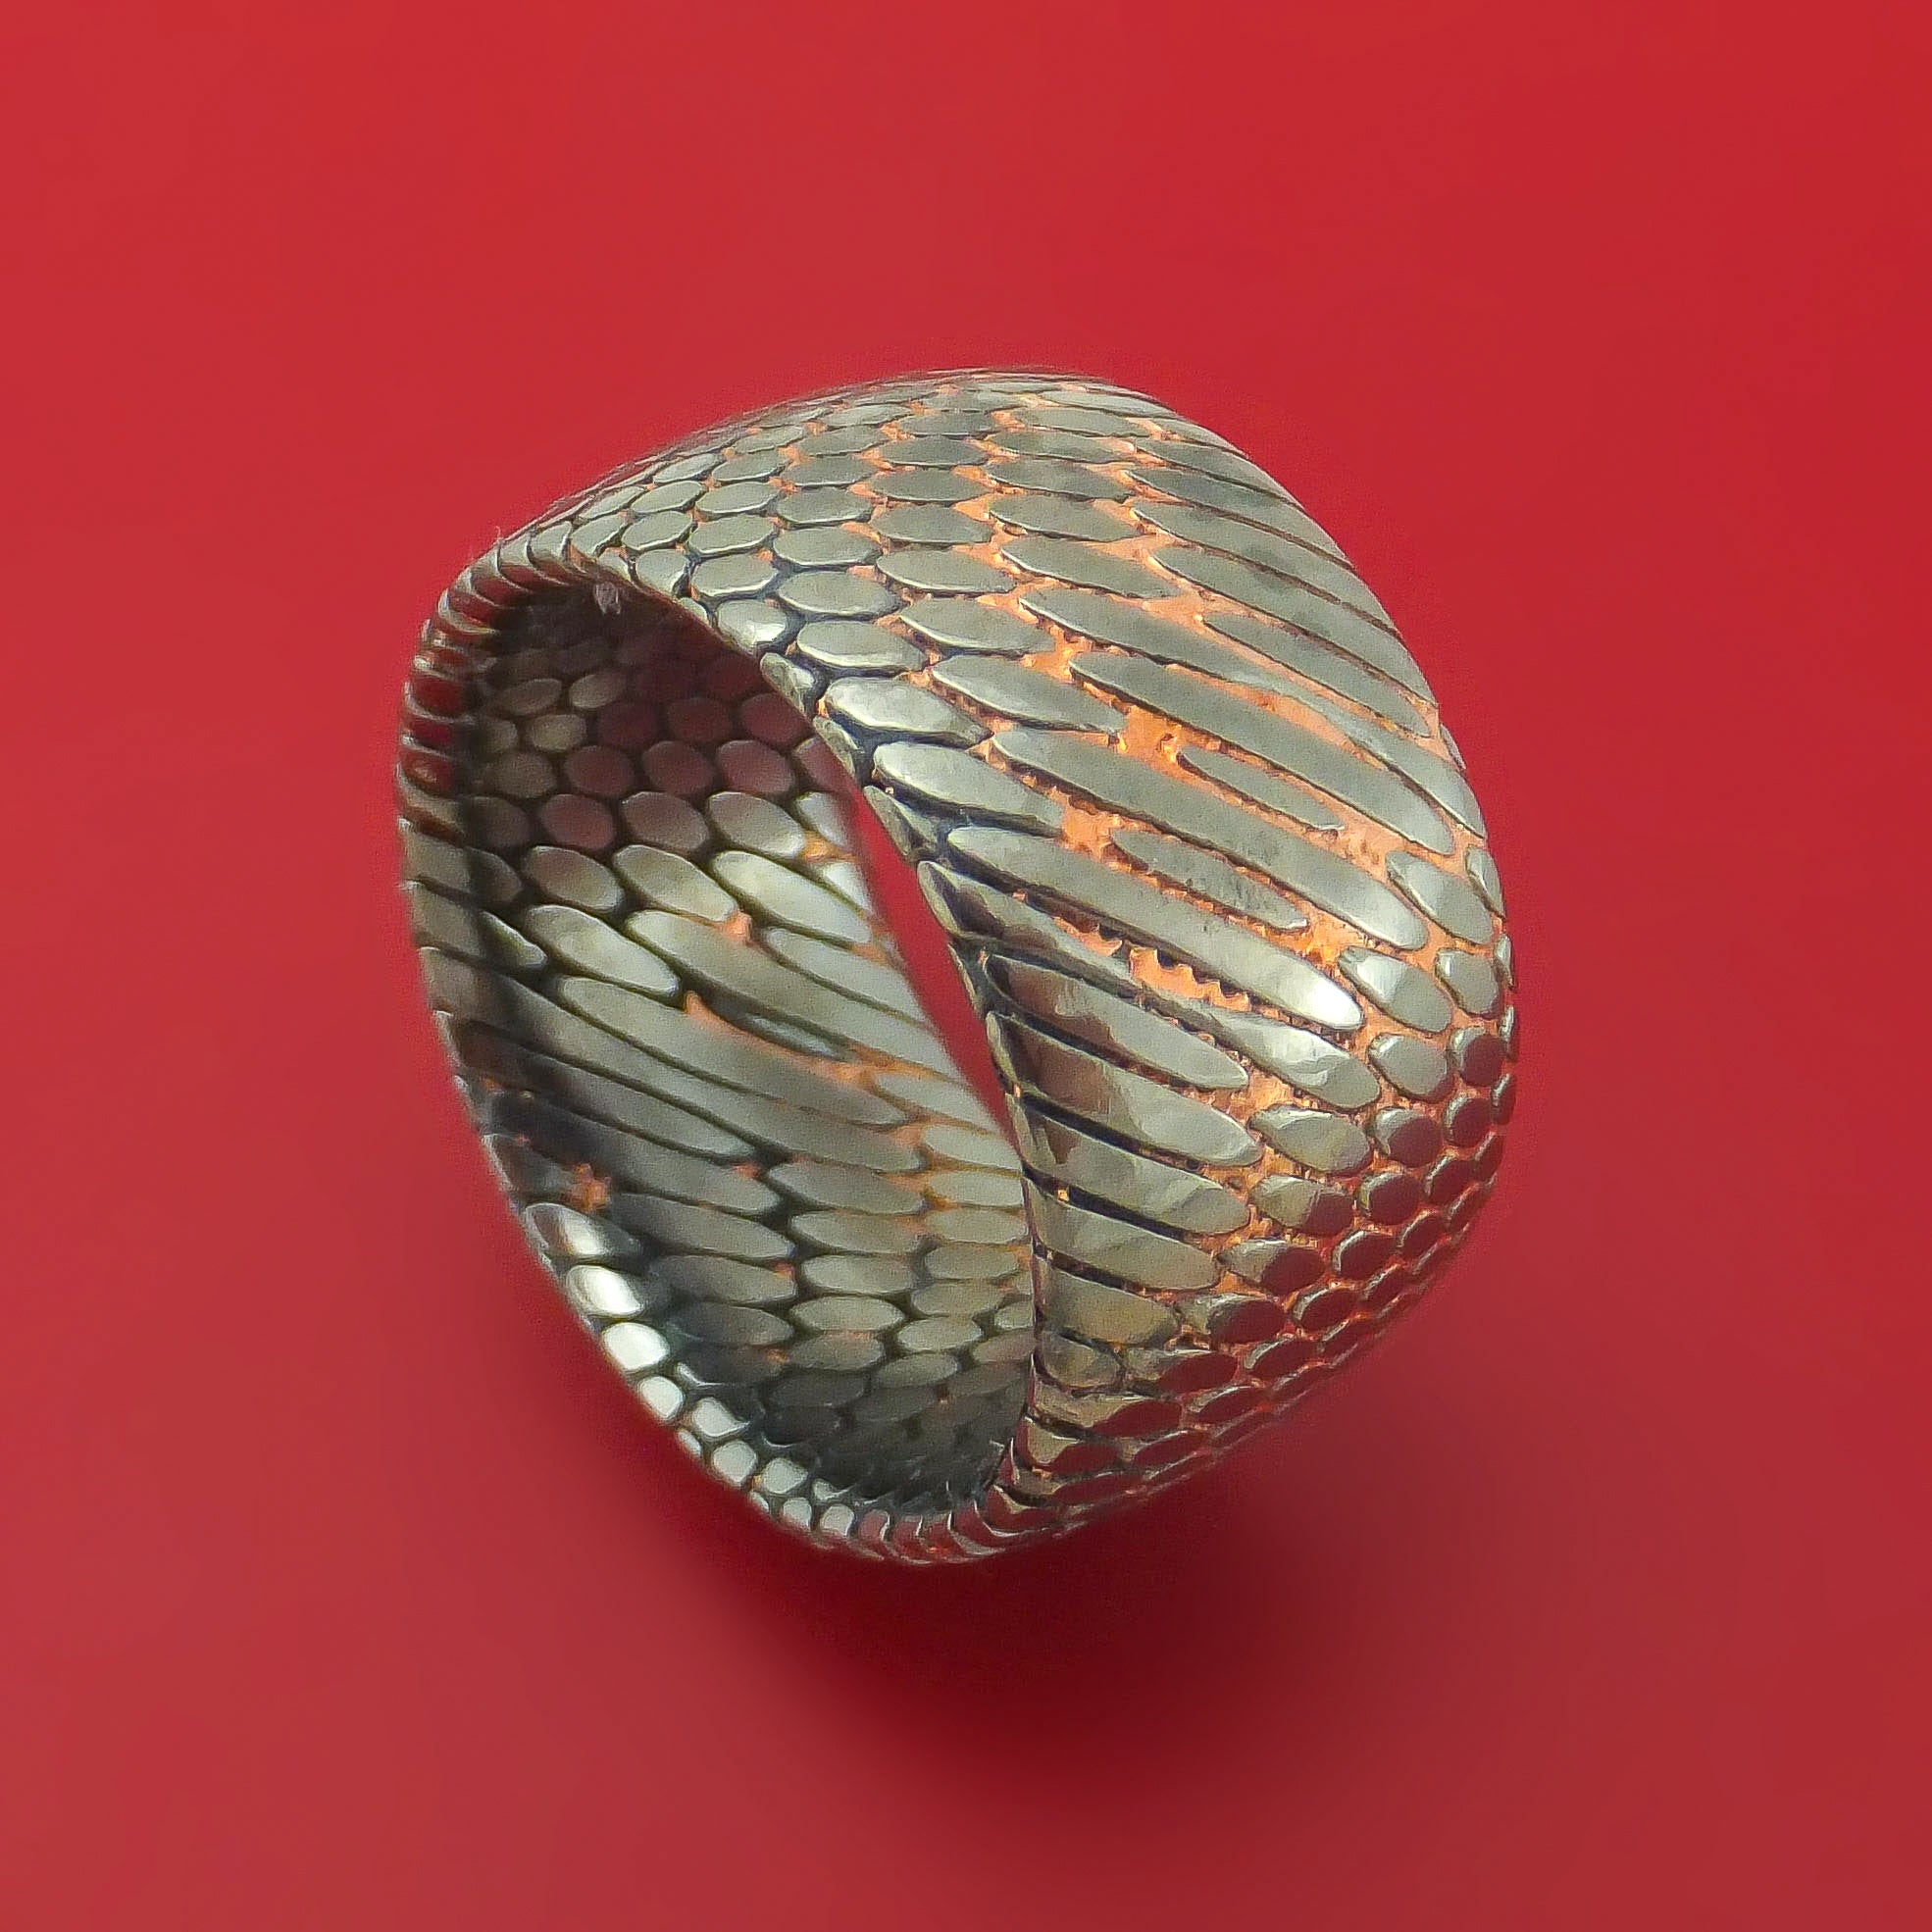 Buy Etched Superconductor Ring Custom Made Titanium-niobium and Copper Band  Online in India - Etsy